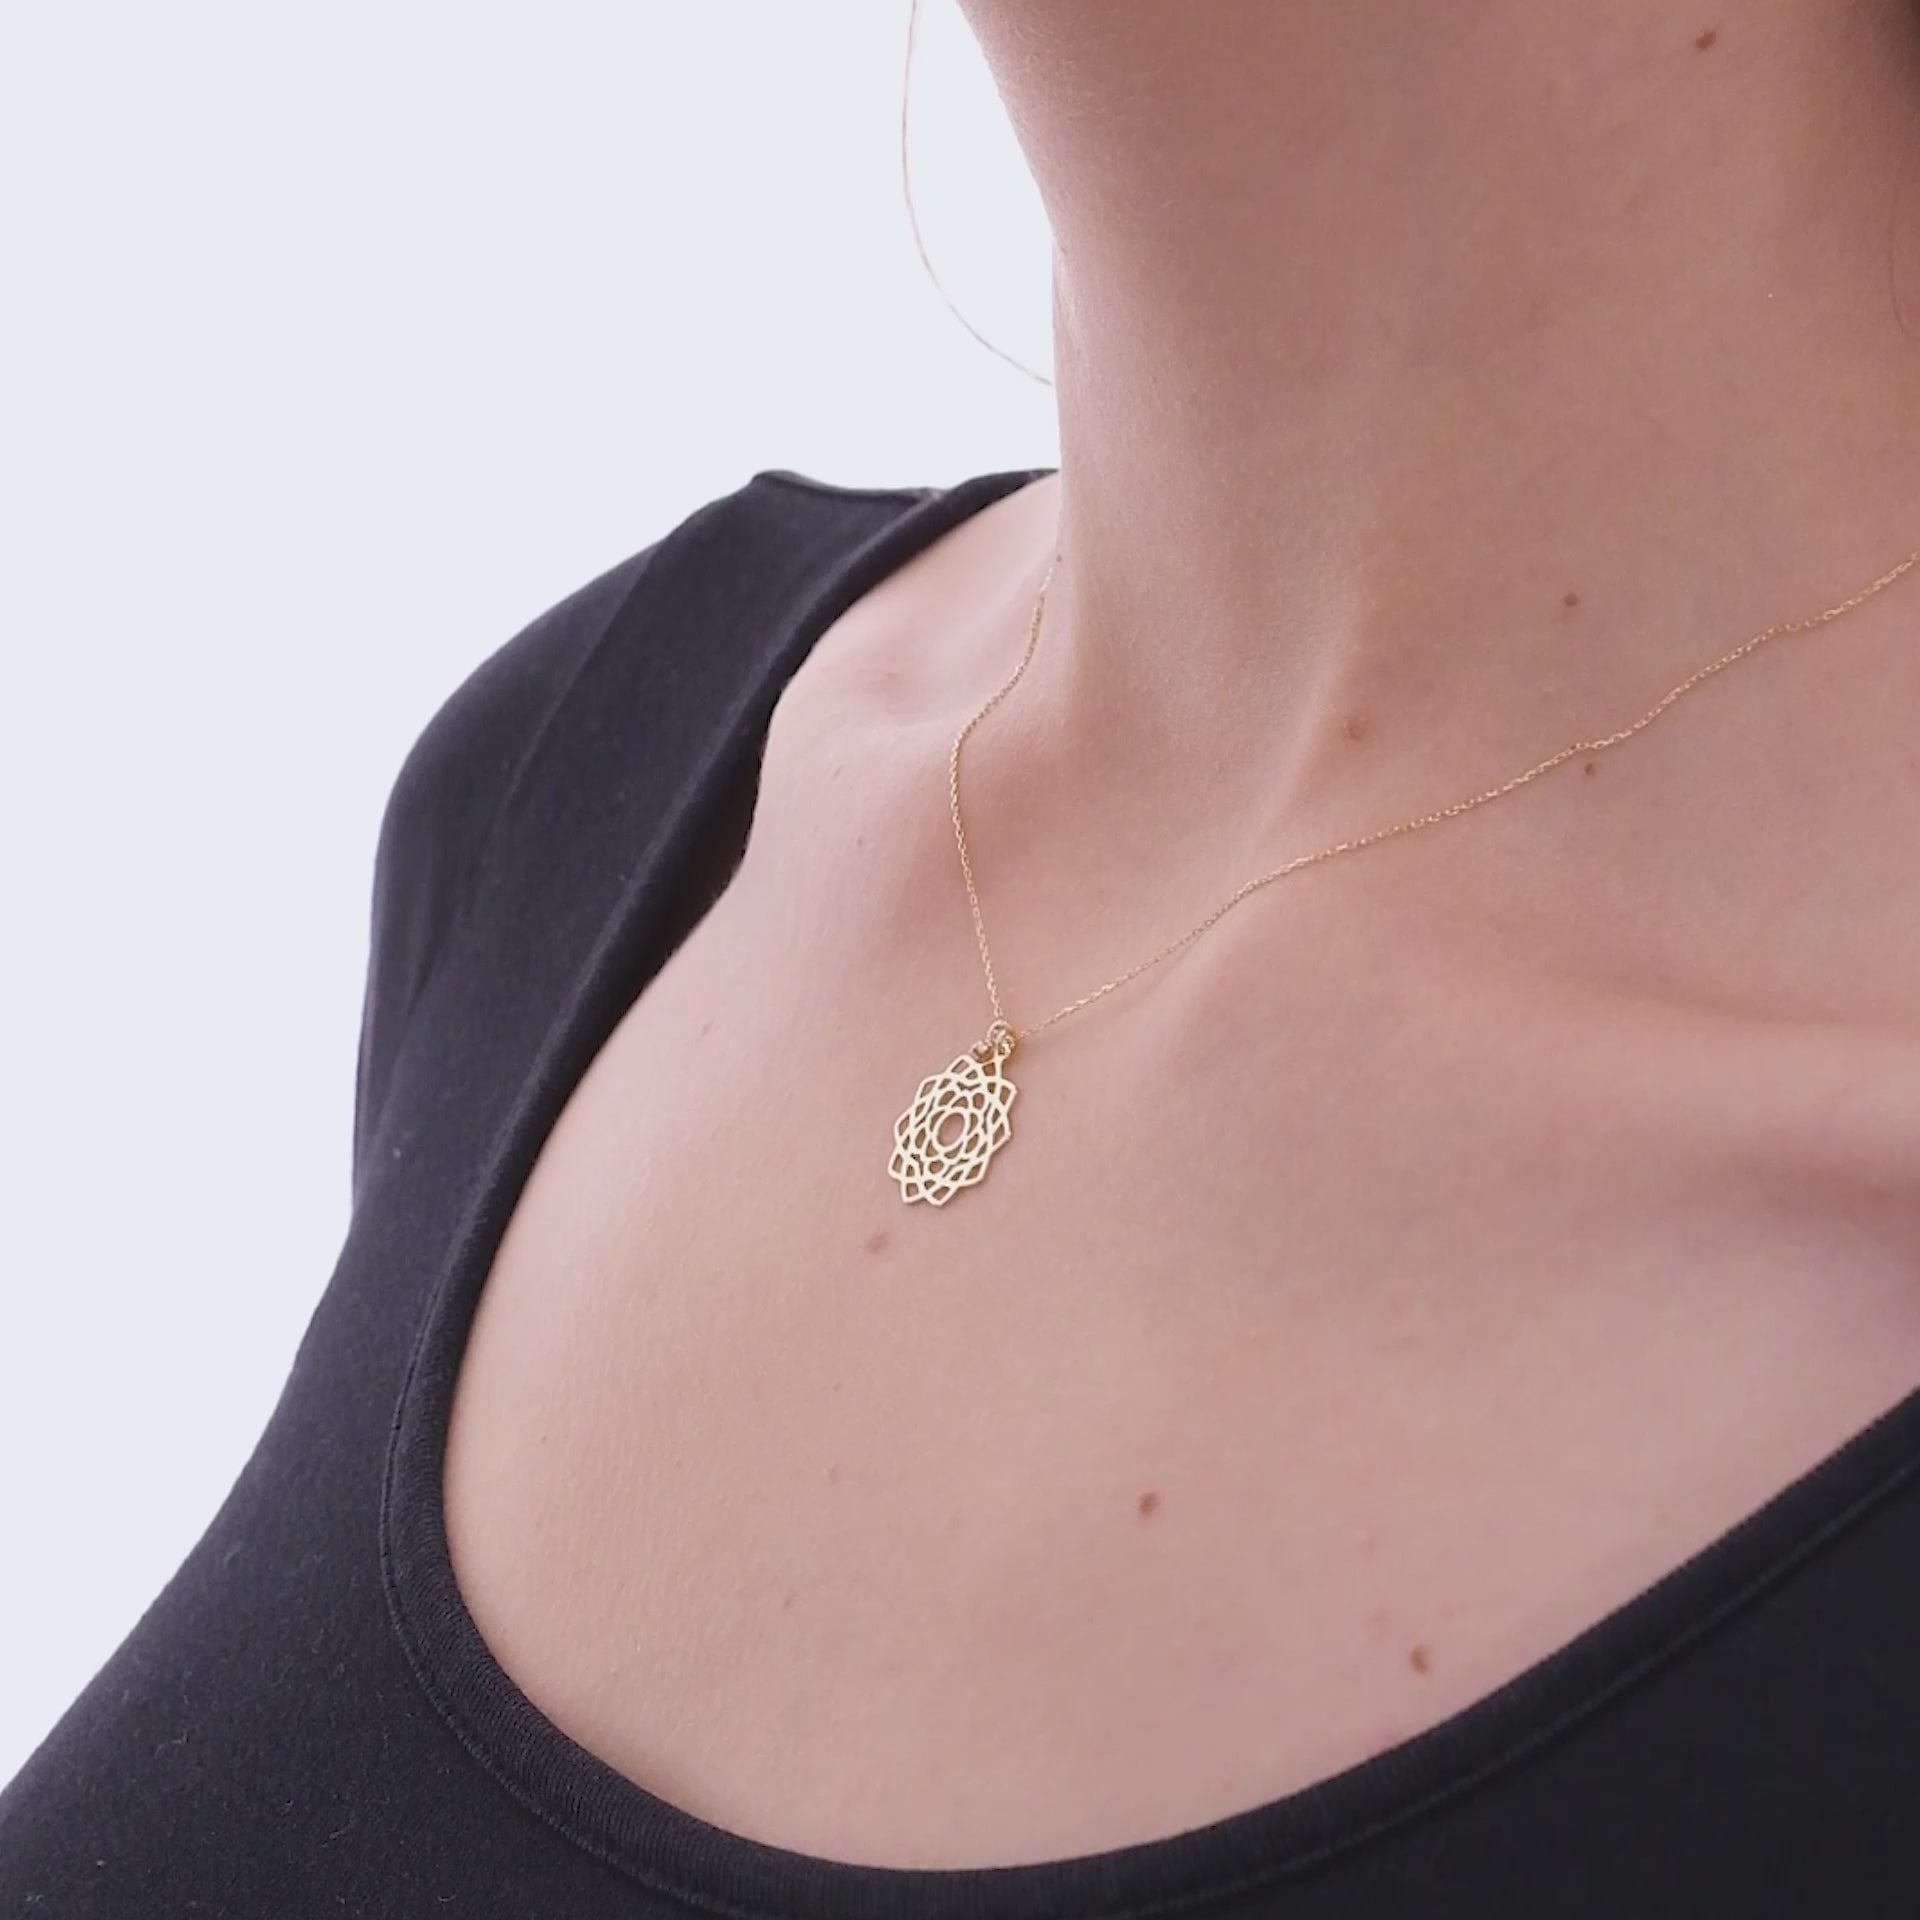 Buy 14k Solid Gold Heart Chakra Necklace, Anahata Pendant, Heart Chakra  Necklace, 14k Gold Anahata Pendant, Chakra Pendant, Anahata Yoga Online in  India - Etsy